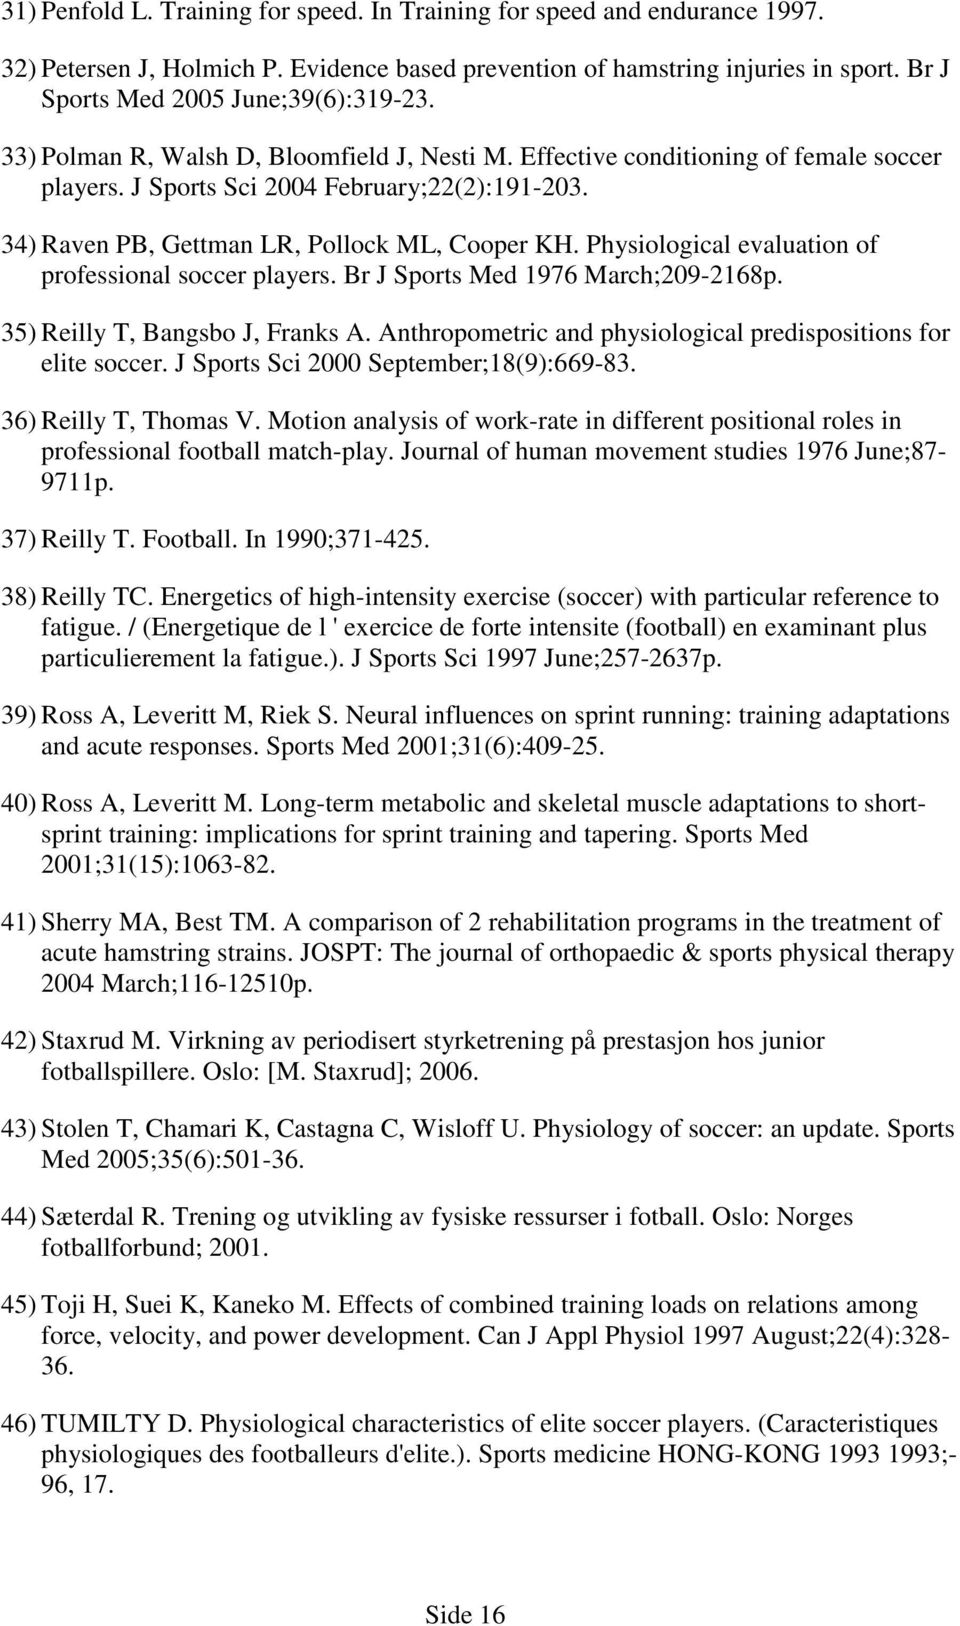 34) Raven PB, Gettman LR, Pollock ML, Cooper KH. Physiological evaluation of professional soccer players. Br J Sports Med 1976 March;209-2168p. 35) Reilly T, Bangsbo J, Franks A.